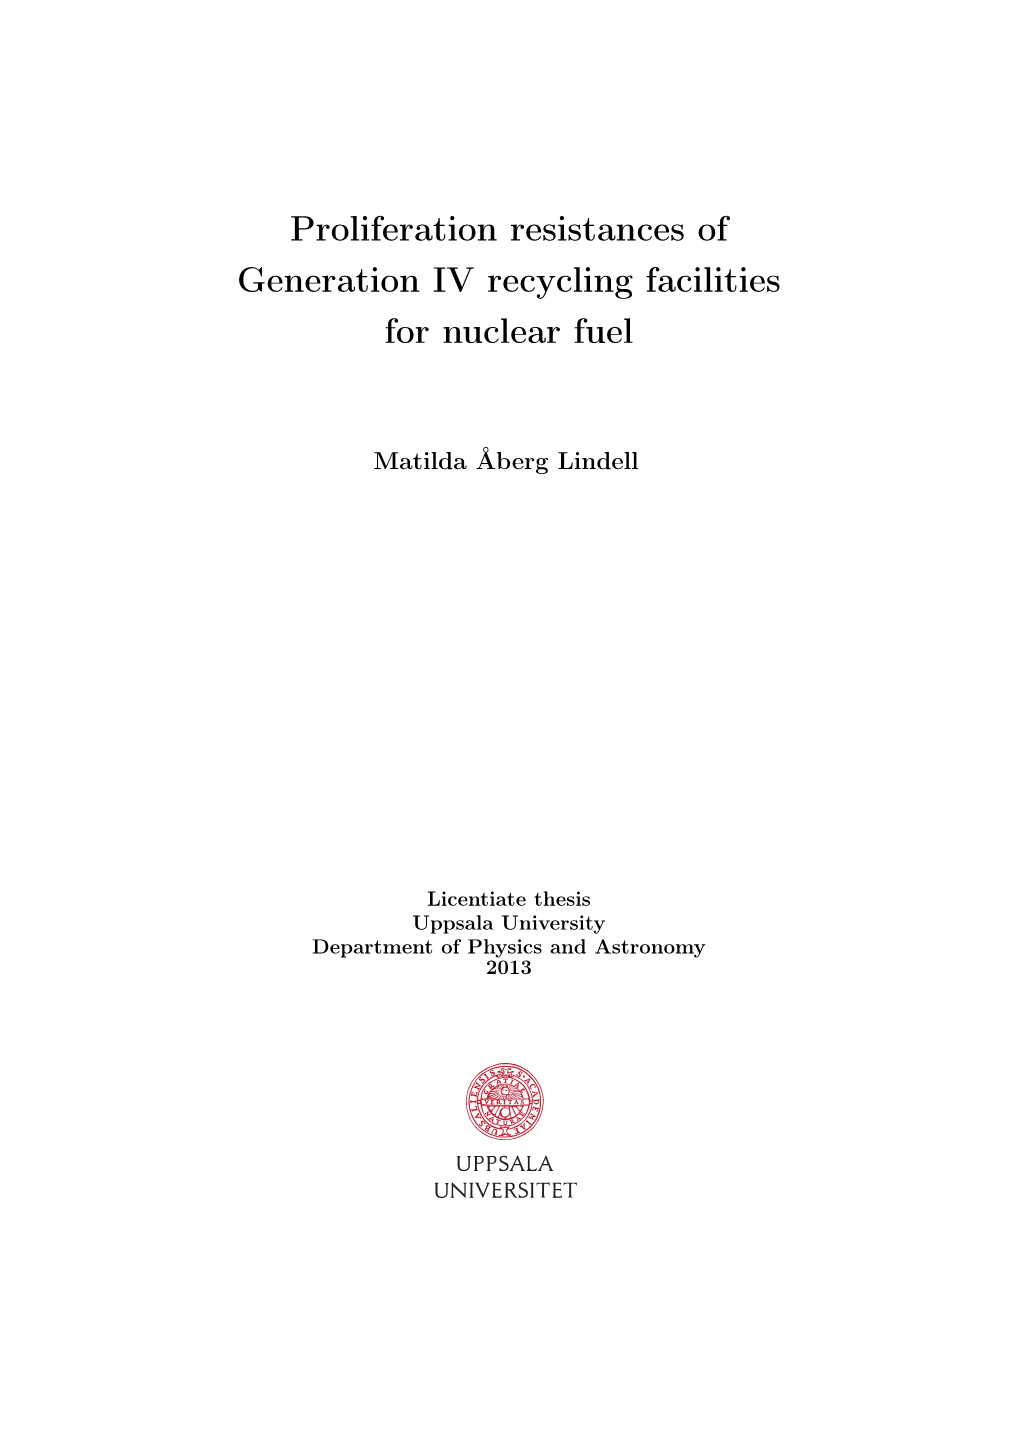 Proliferation Resistances of Generation IV Recycling Facilities for Nuclear Fuel